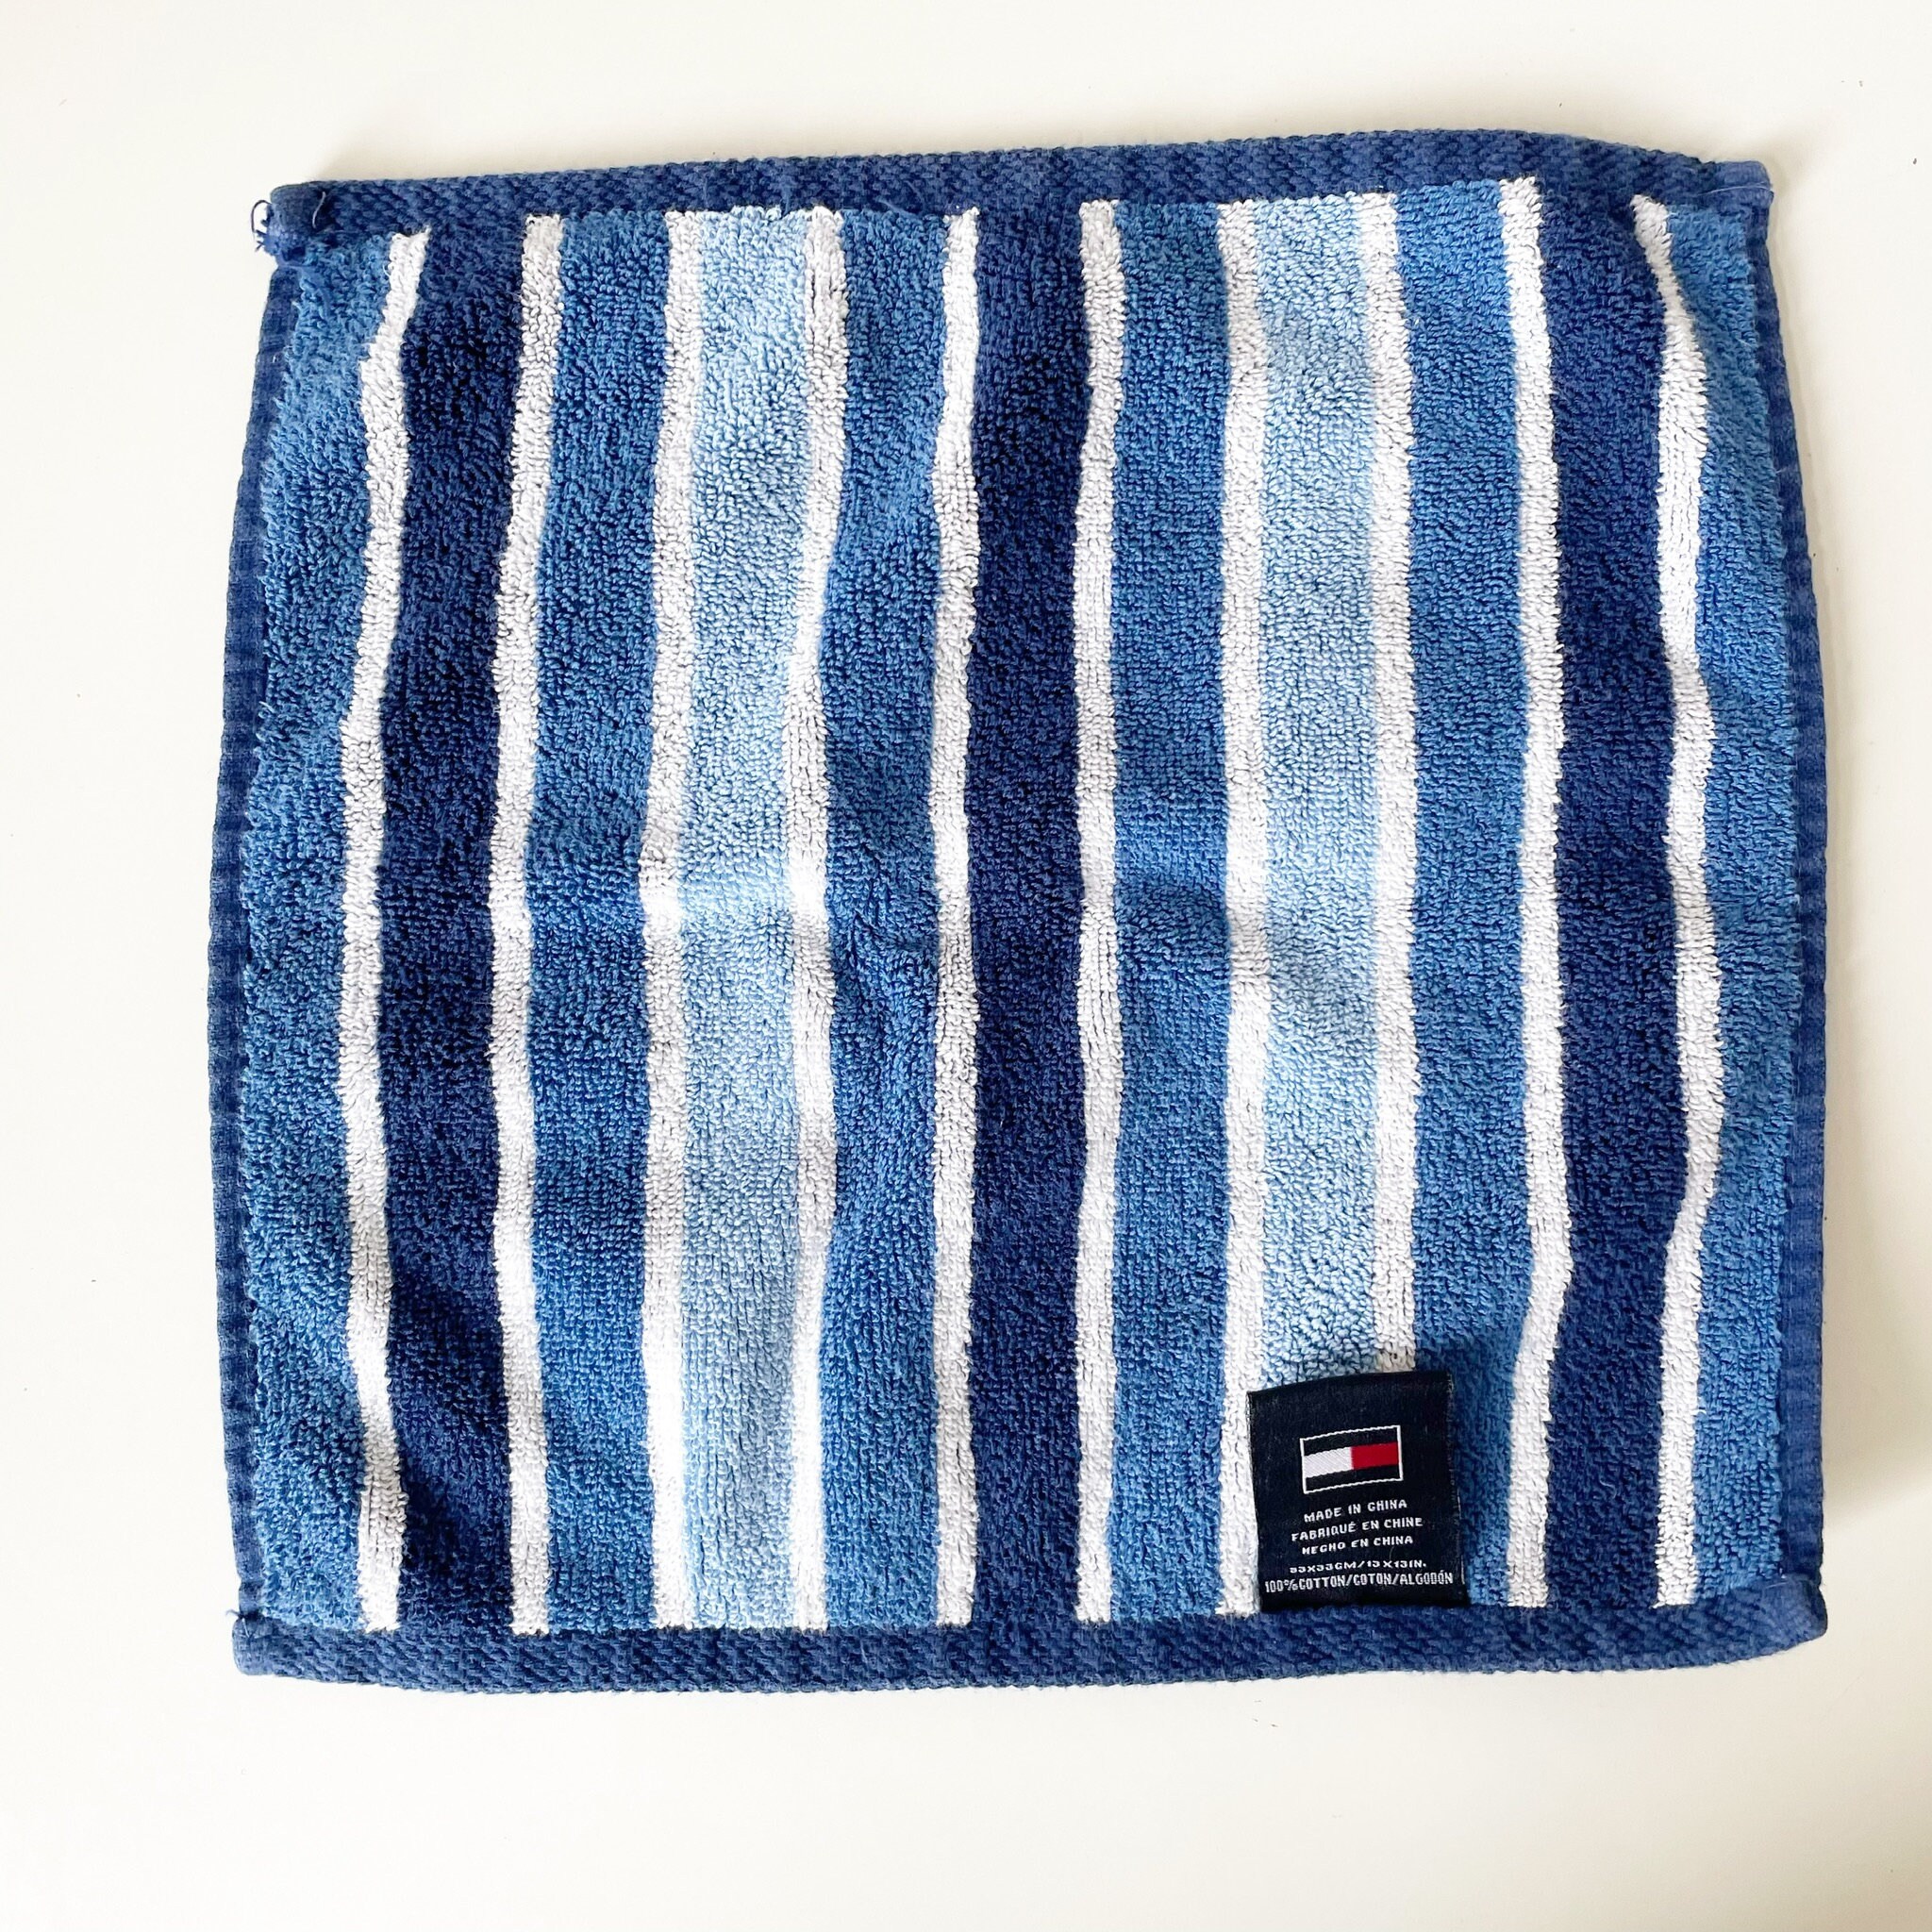 ALL ABOUT SIX - Tommy Hilfiger Bath Towels 100% Cotton